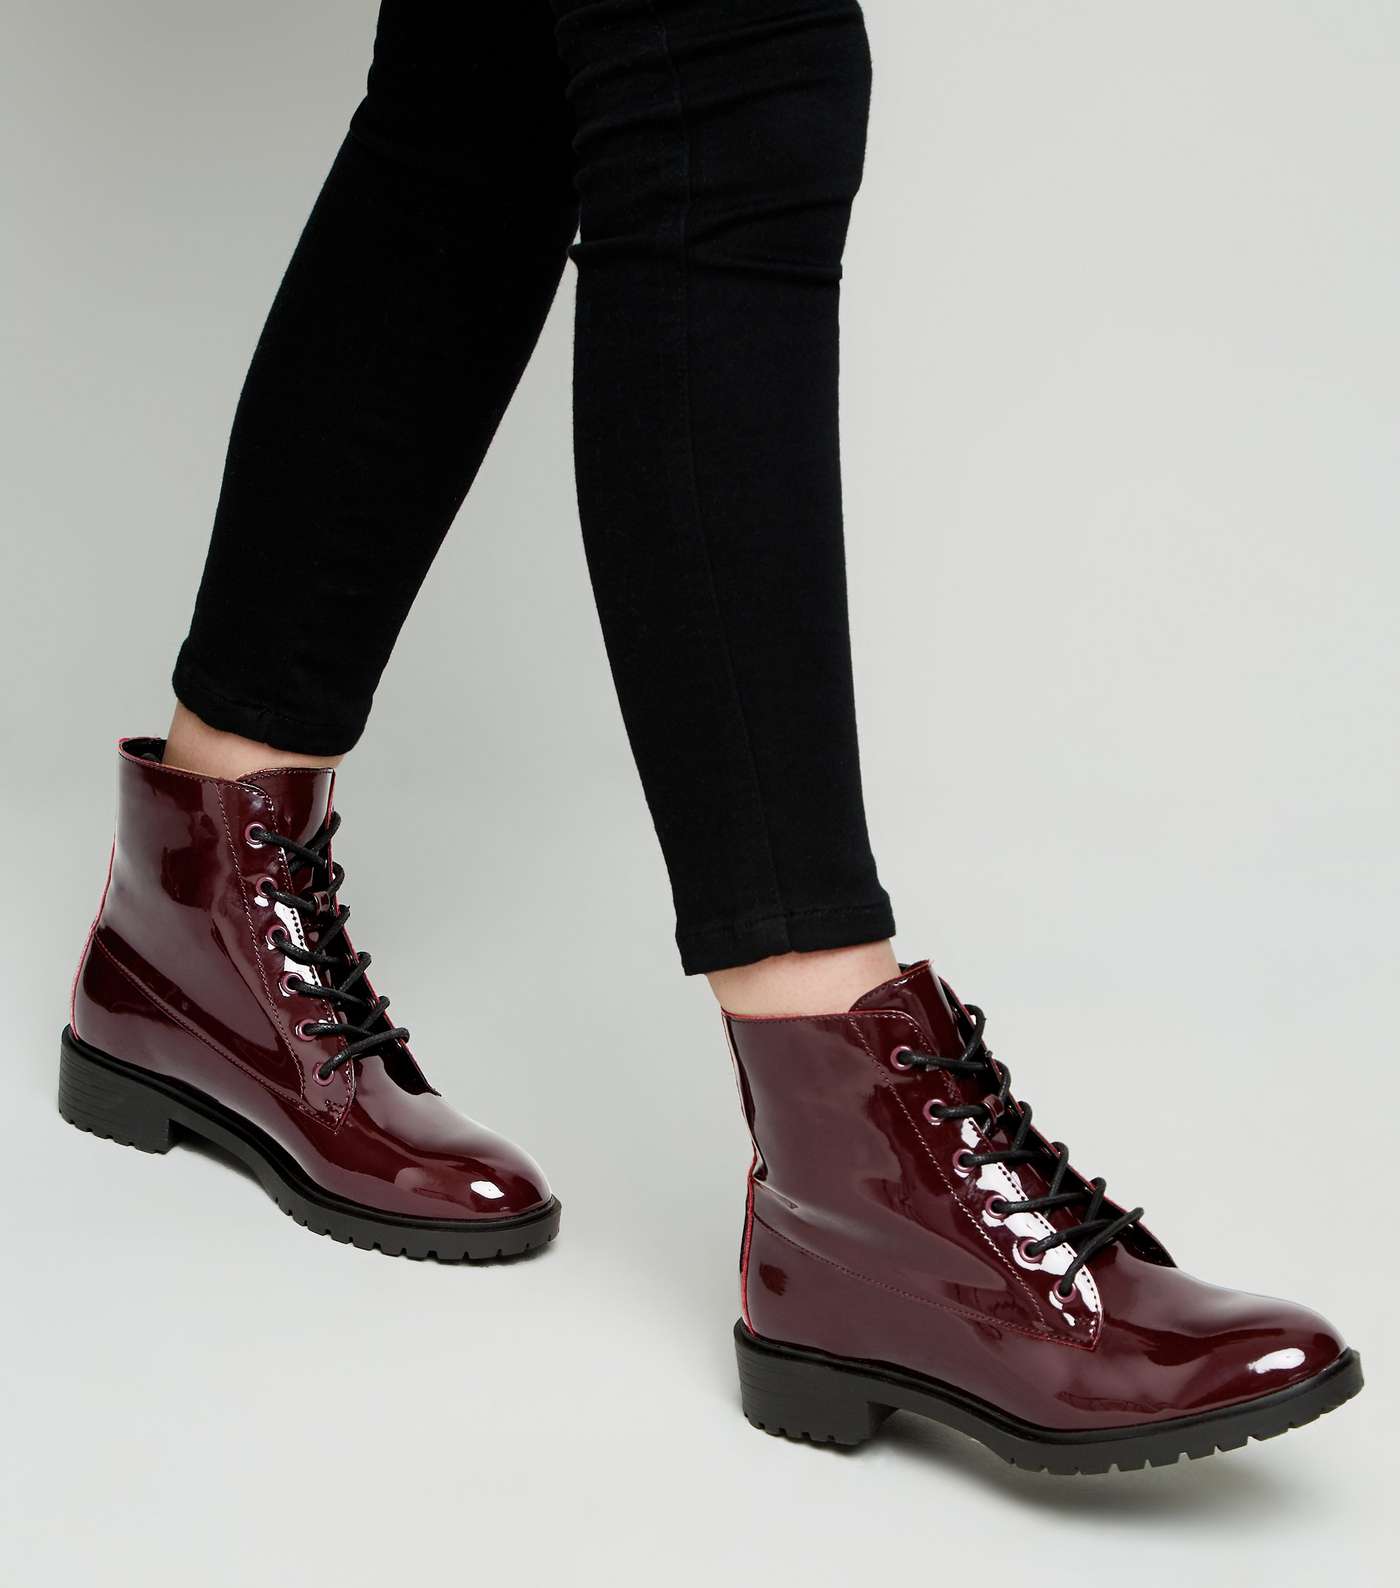 Girls Burgundy Patent Lace Up Boots Image 2